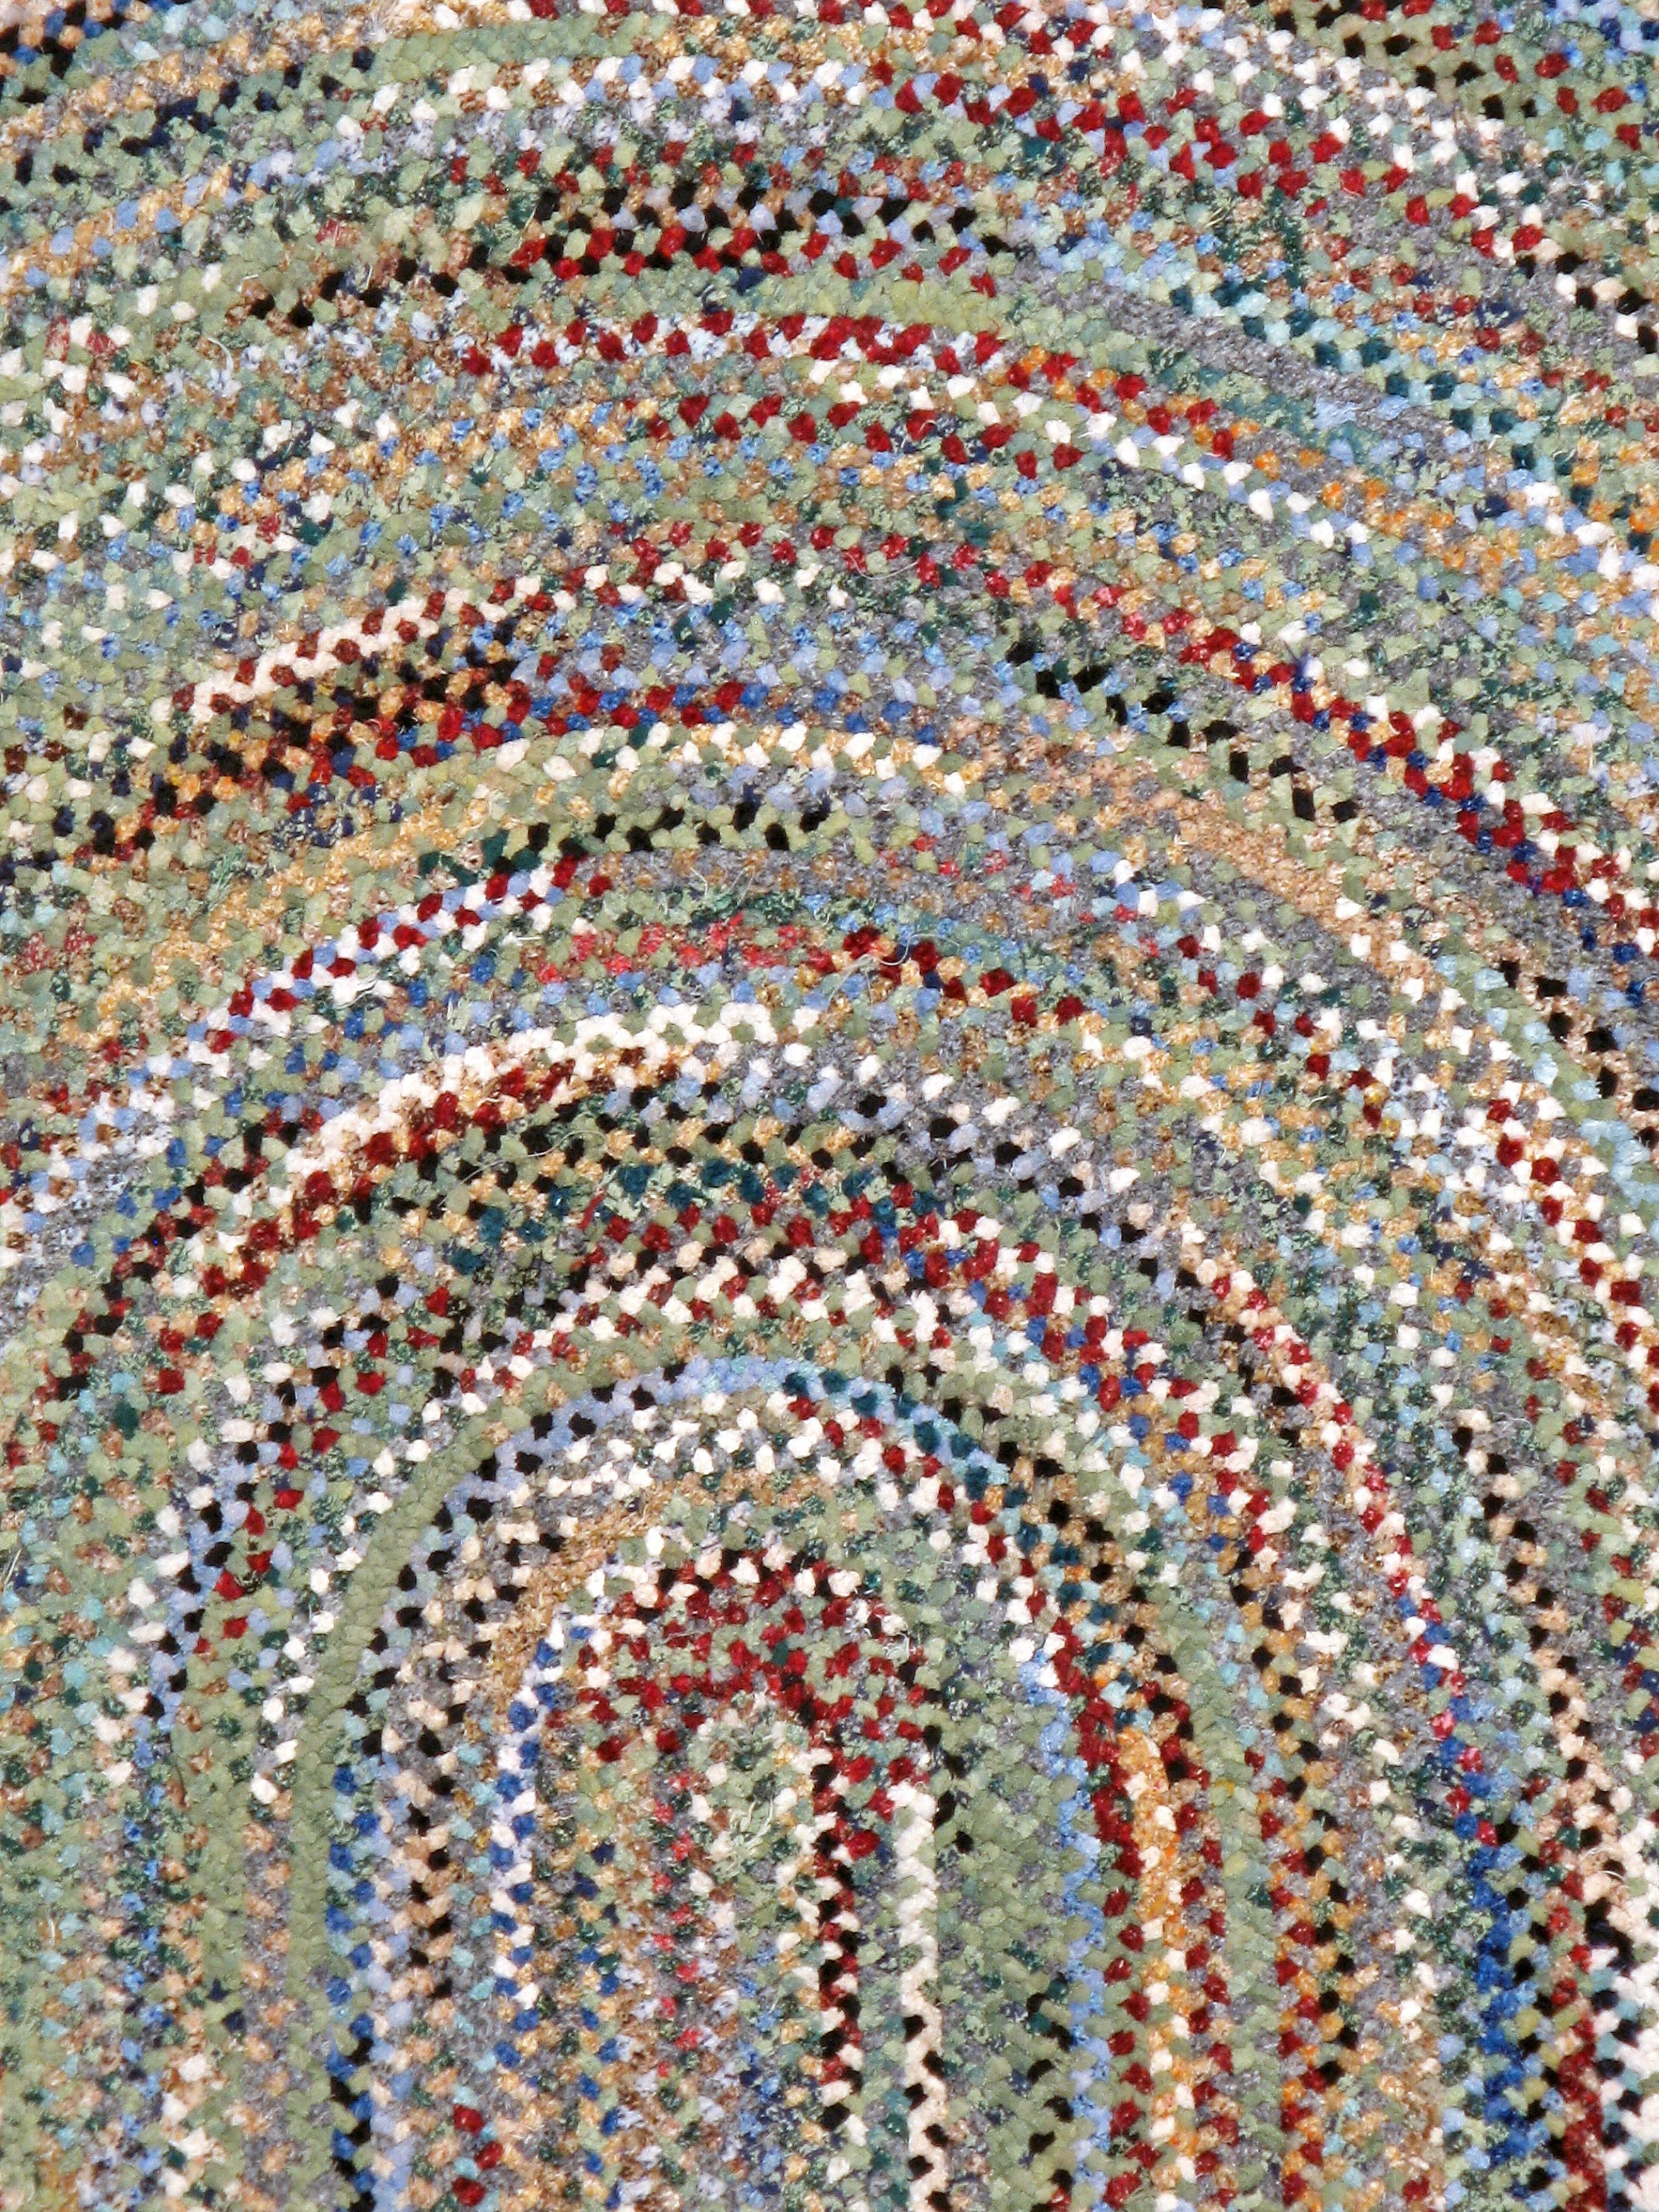 A vintage American Braid carpet from the mid-20th century. This dizzying ‘end-of-day’ braided oval features a virtually uncountable number of fabric bits in an endless color display with black, charcoal, white, grass green, celadon, orange, light